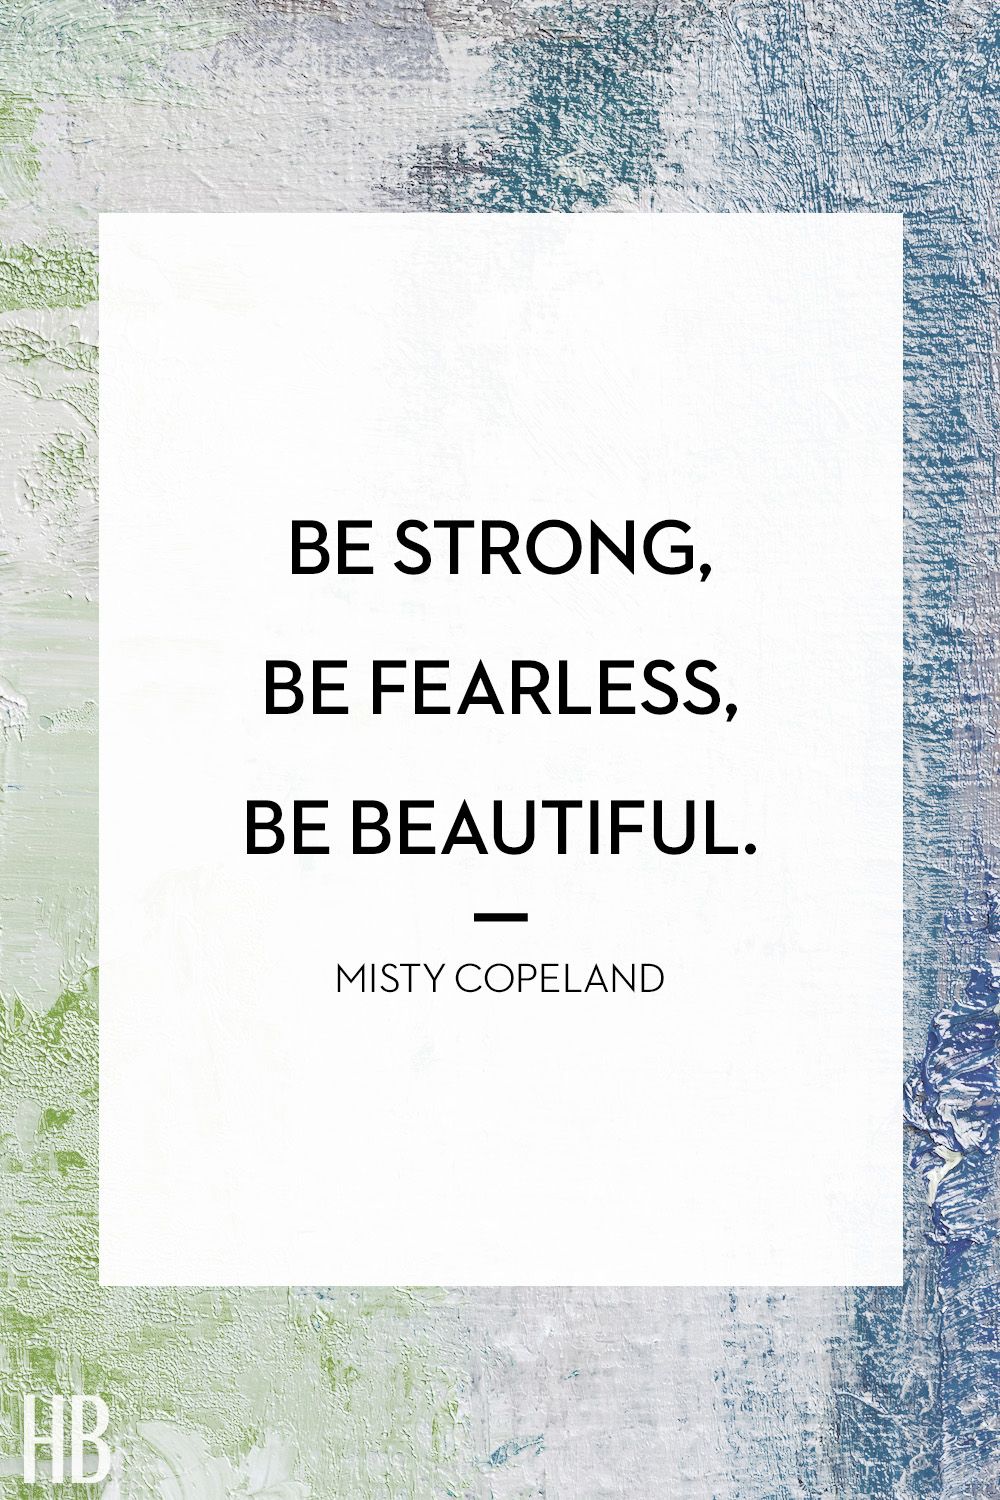 12 Beautiful Quotes   Sayings About Beauty